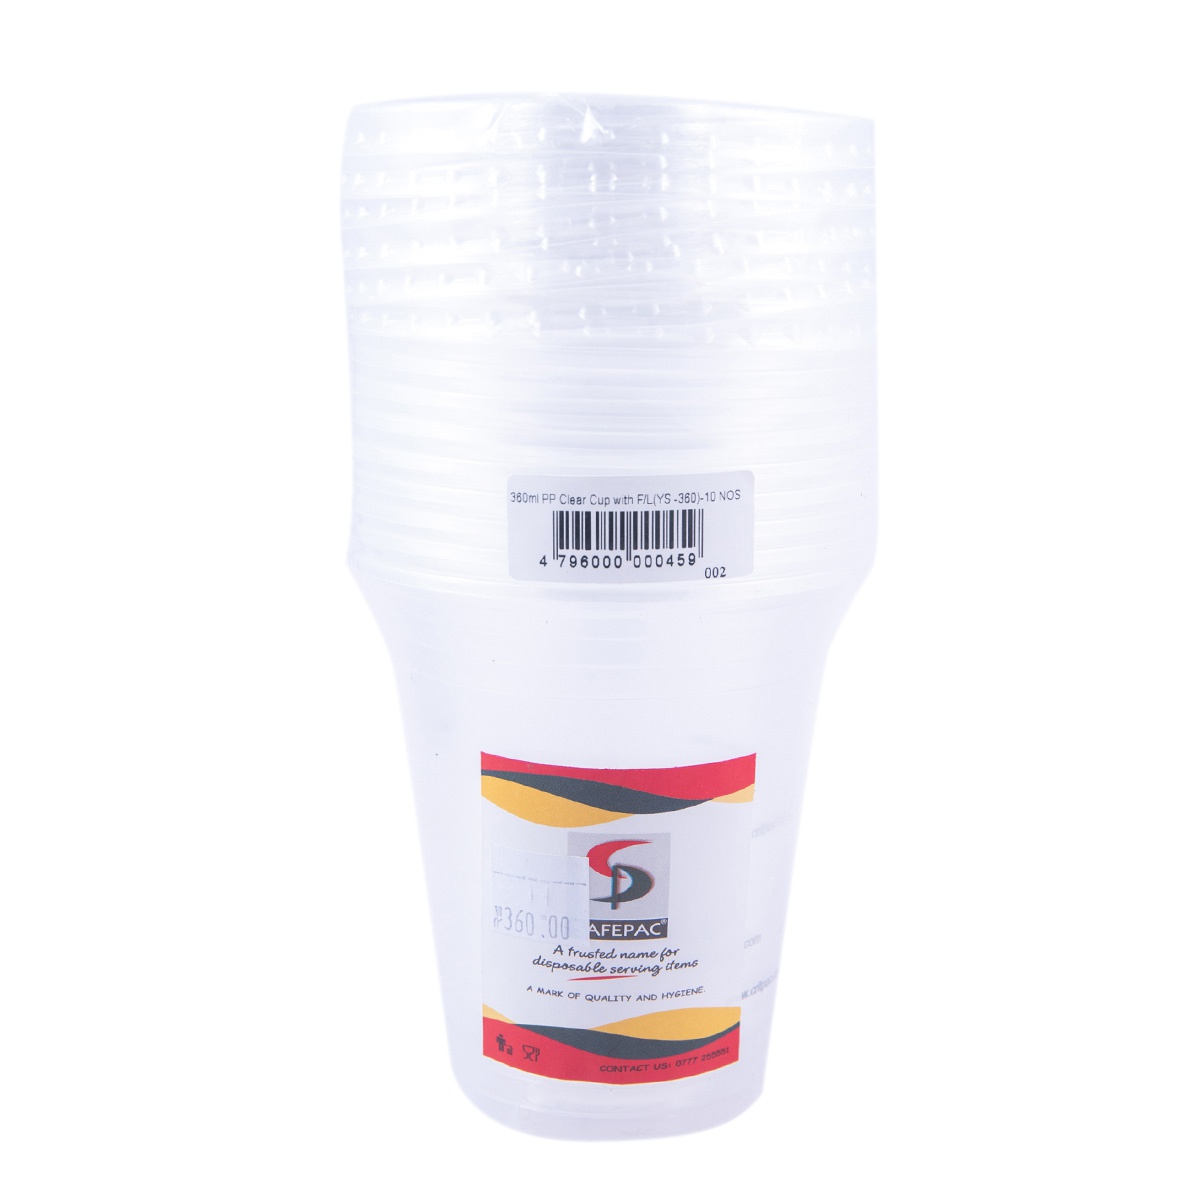 Safepac Paper Coffee Cup With Black Slipper Lid 12 Oz. - SAFEPAC - Disposables - in Sri Lanka